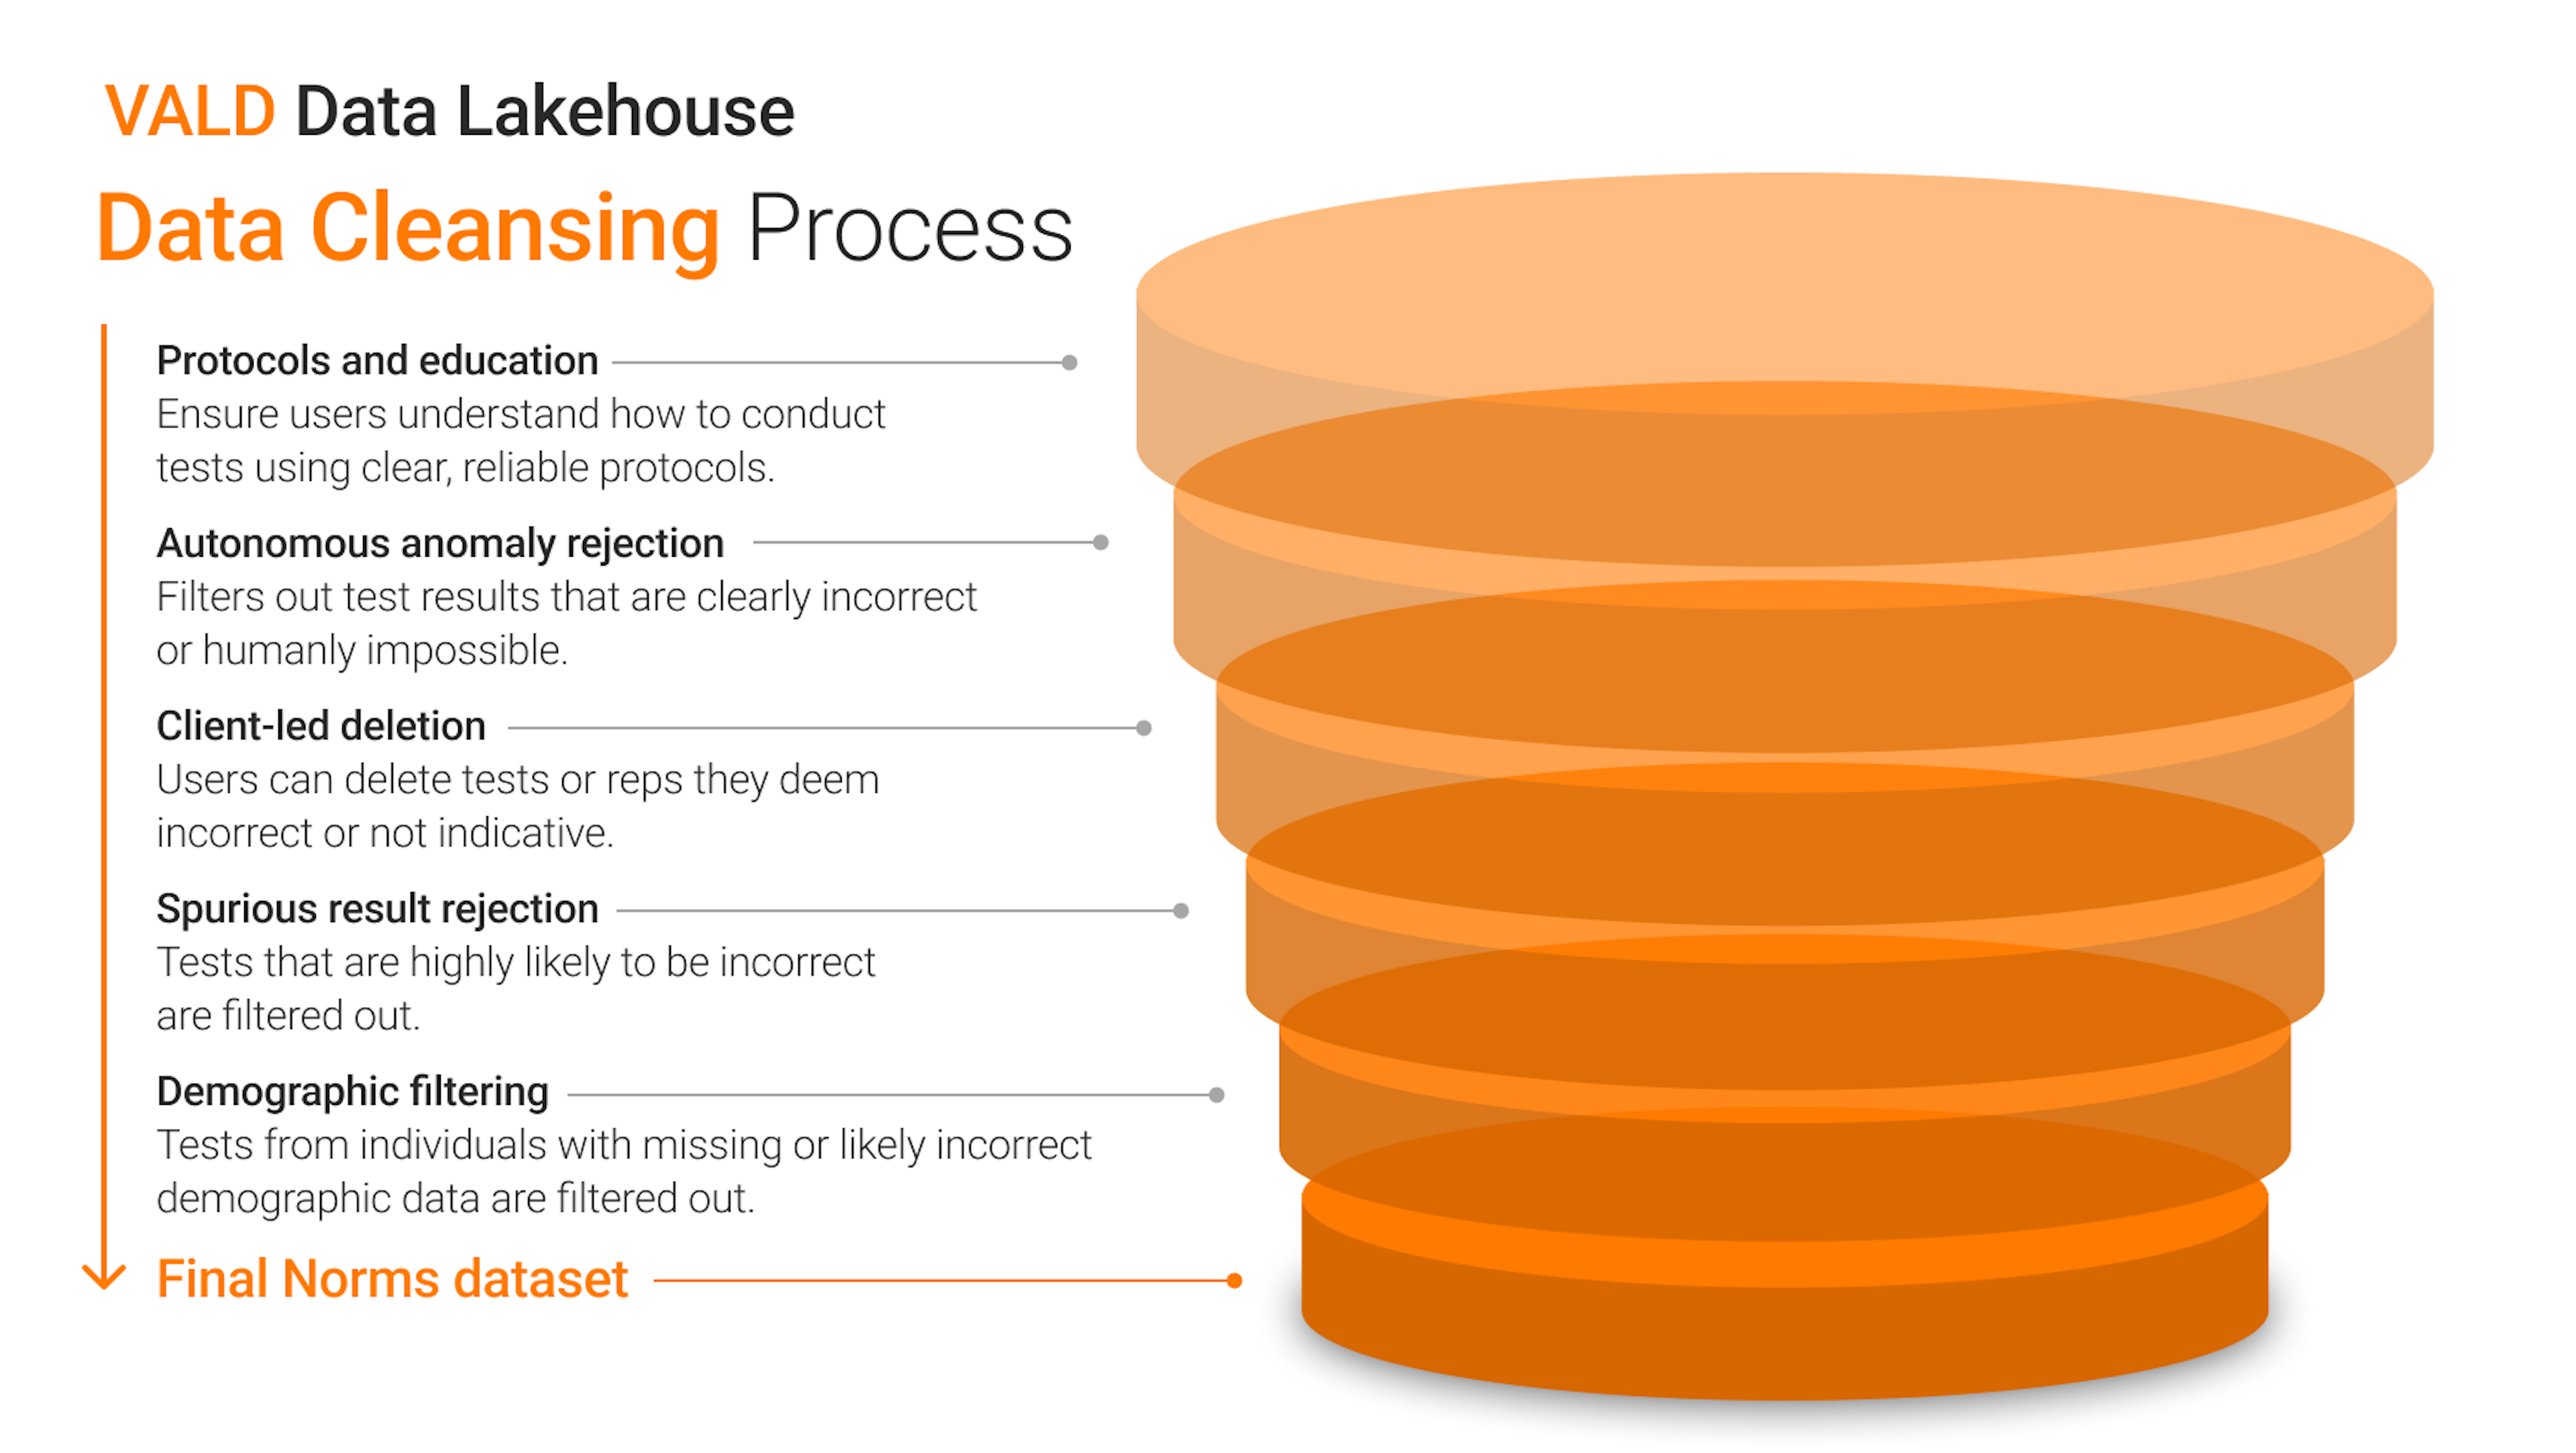 Figure 4. VALD’s data cleansing process, which is used to process millions of data points into a clean, accurate, reliable dataset.